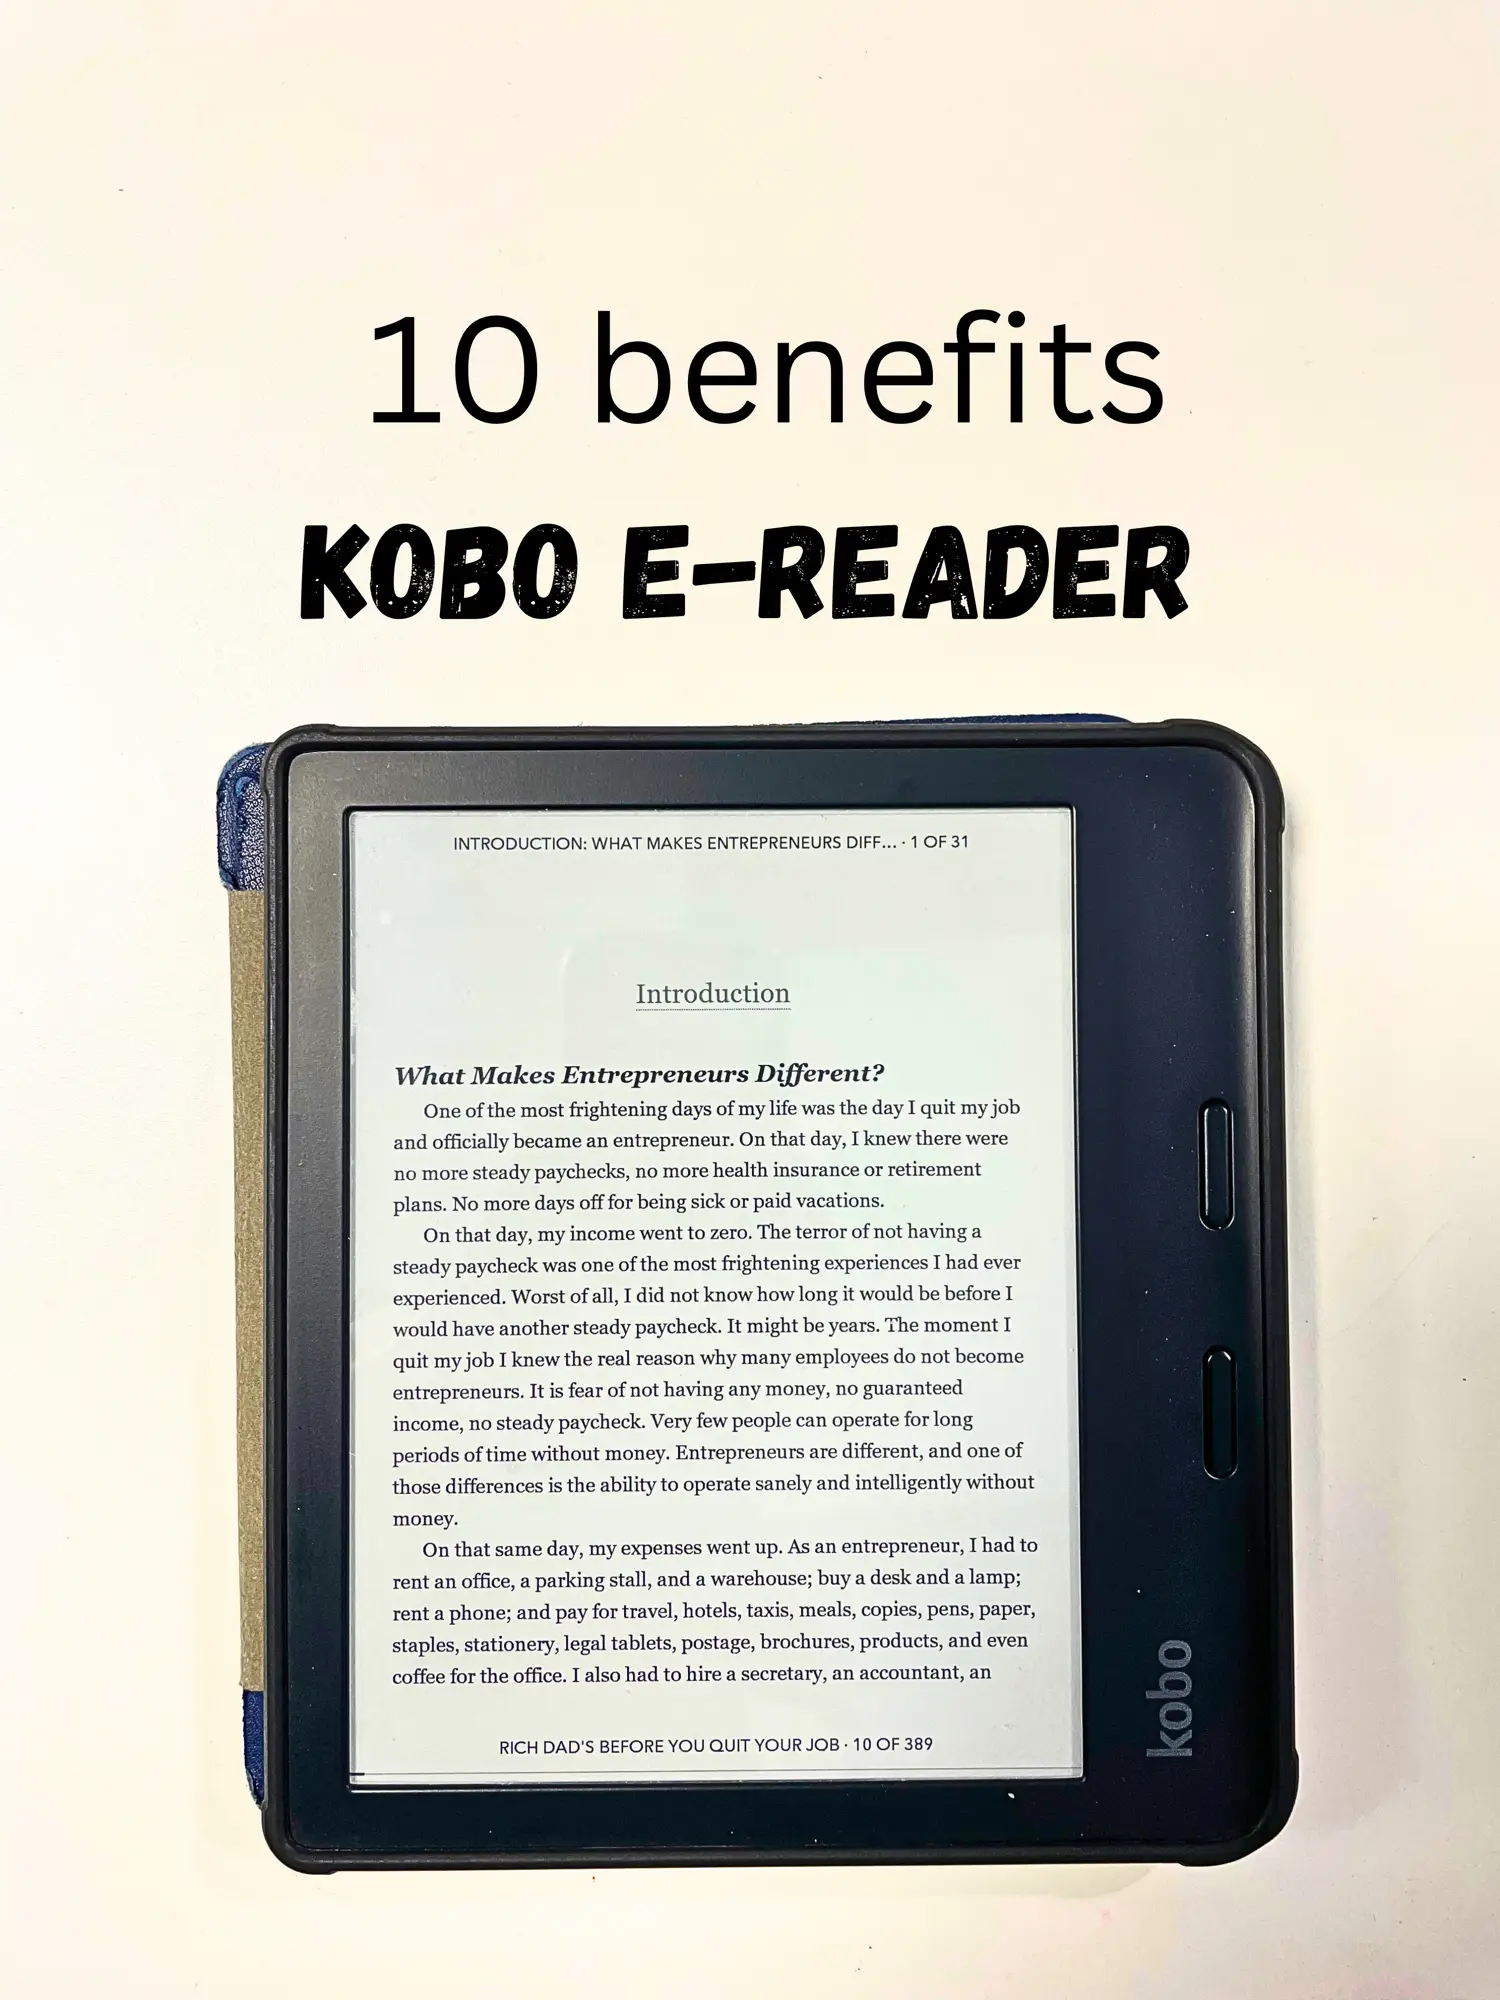 How to Transfer Kobo Books to Kindle